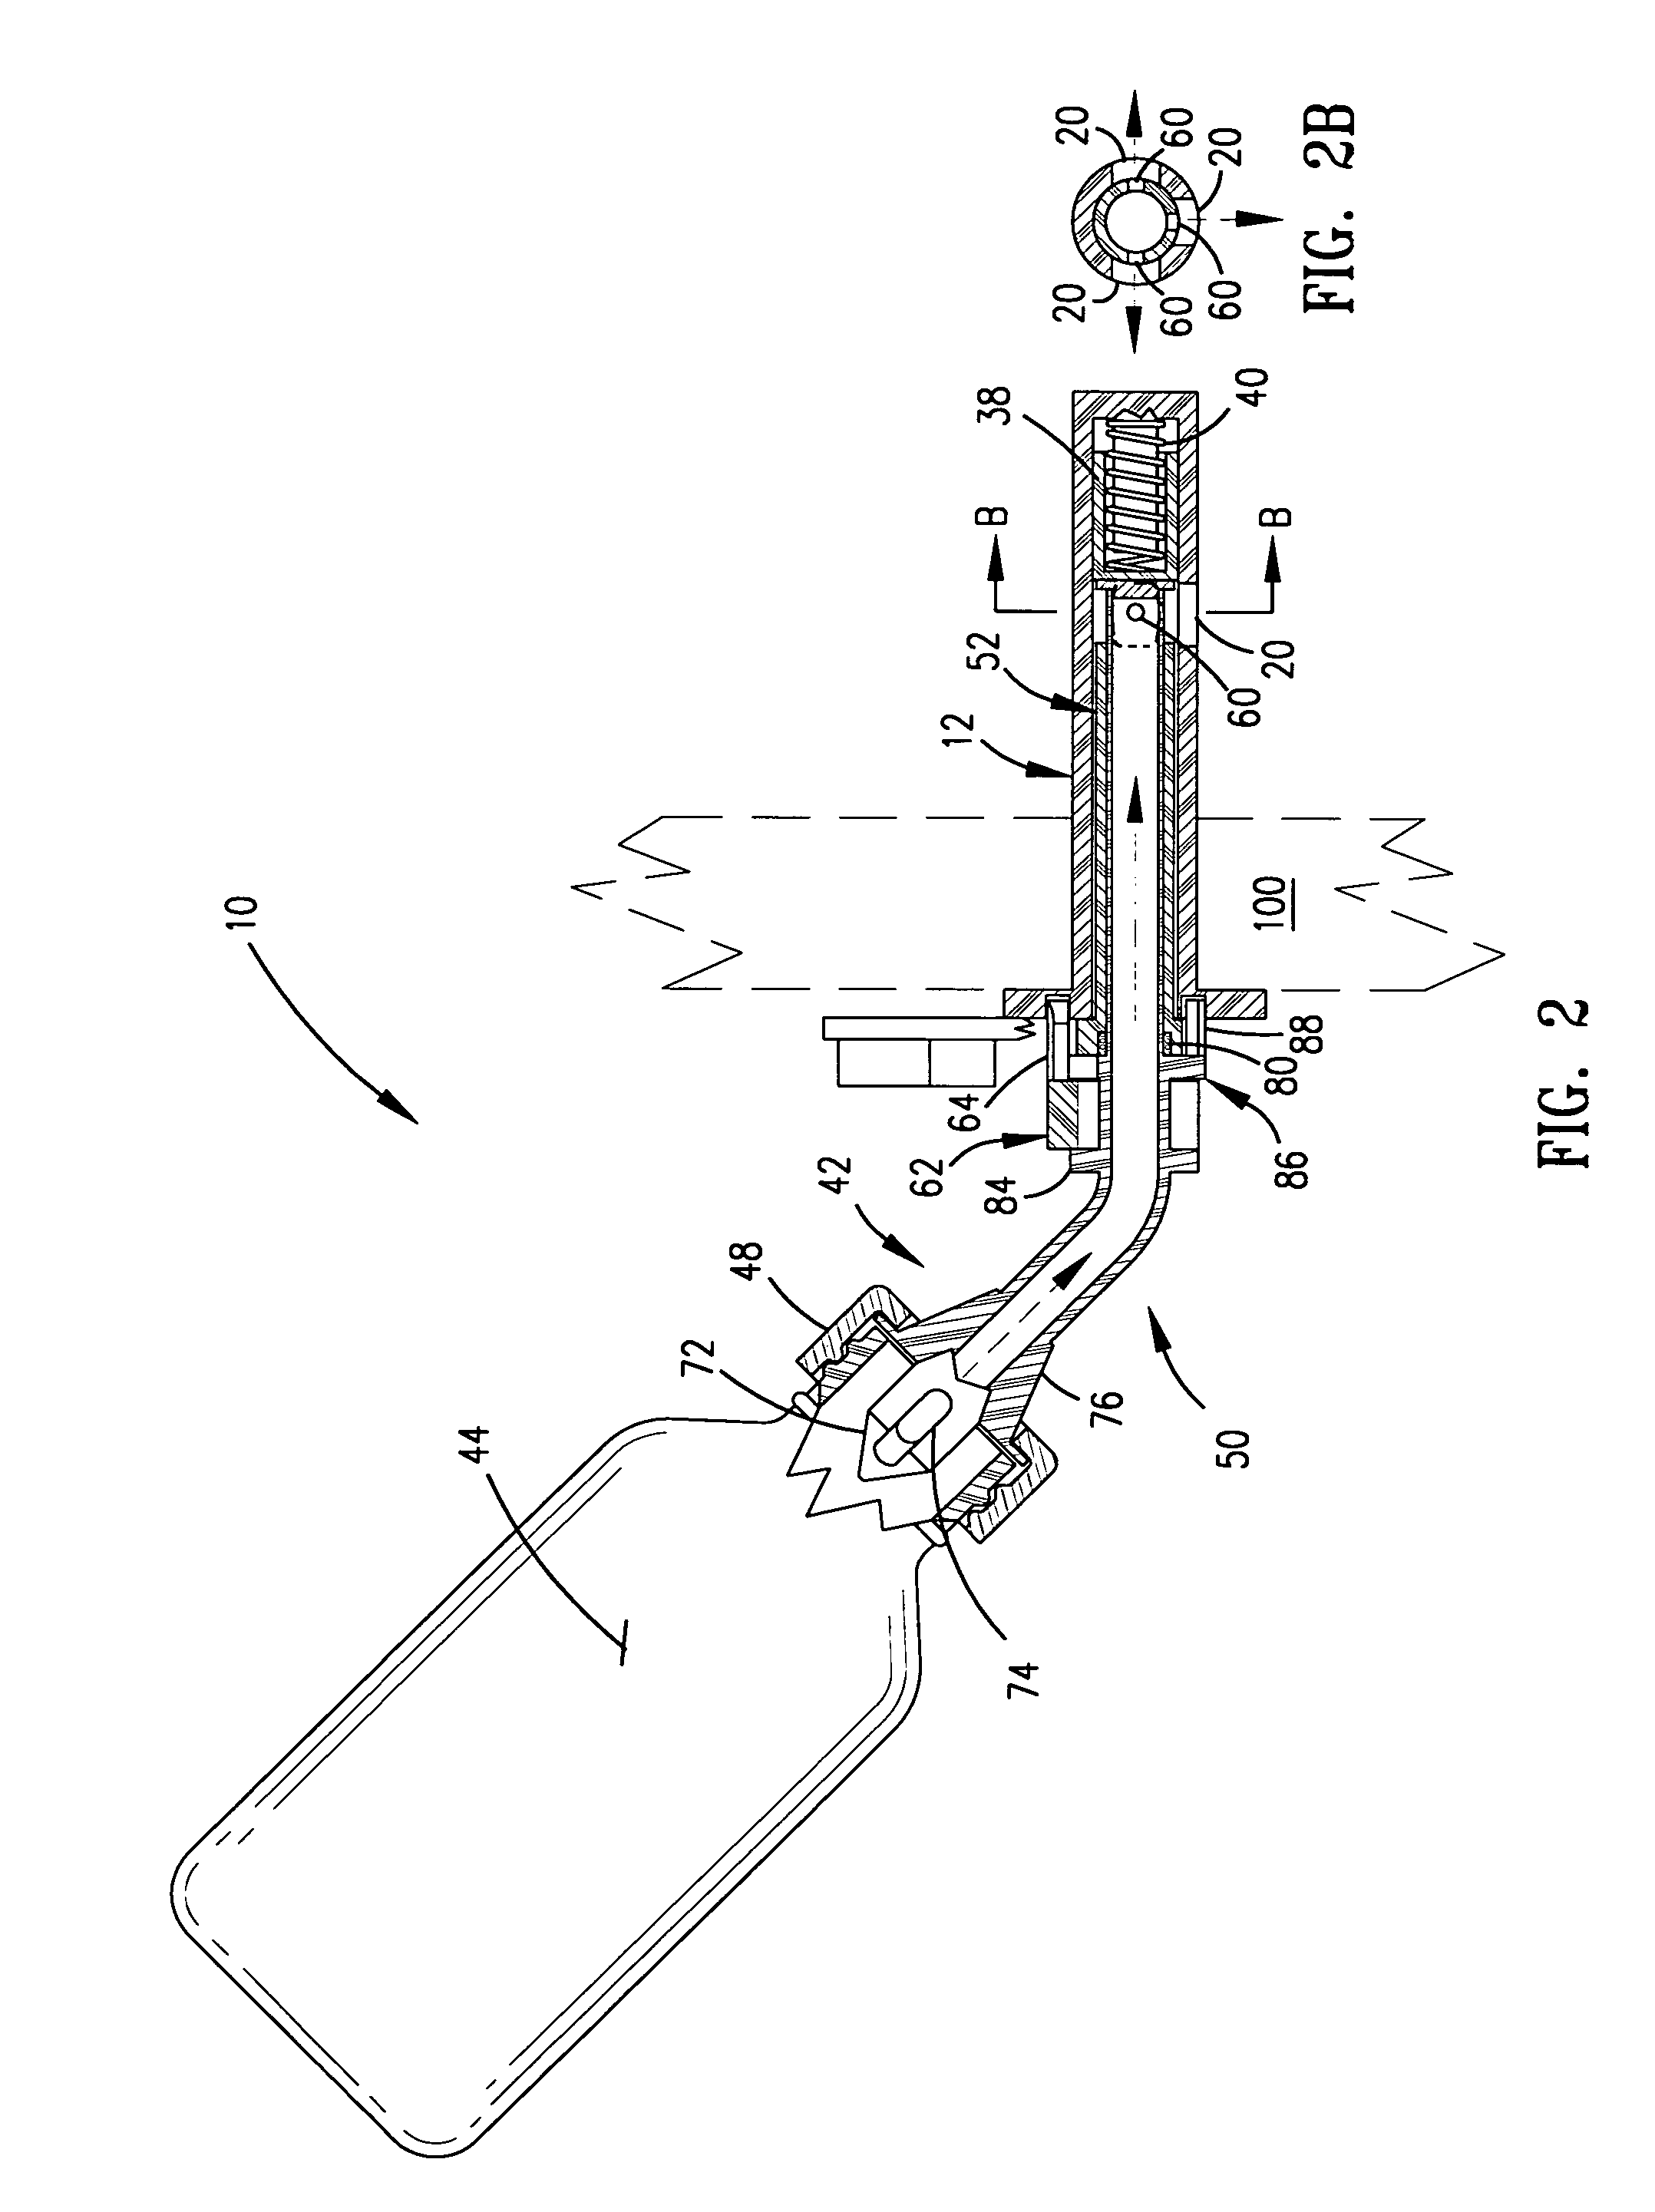 Pesticide injection system